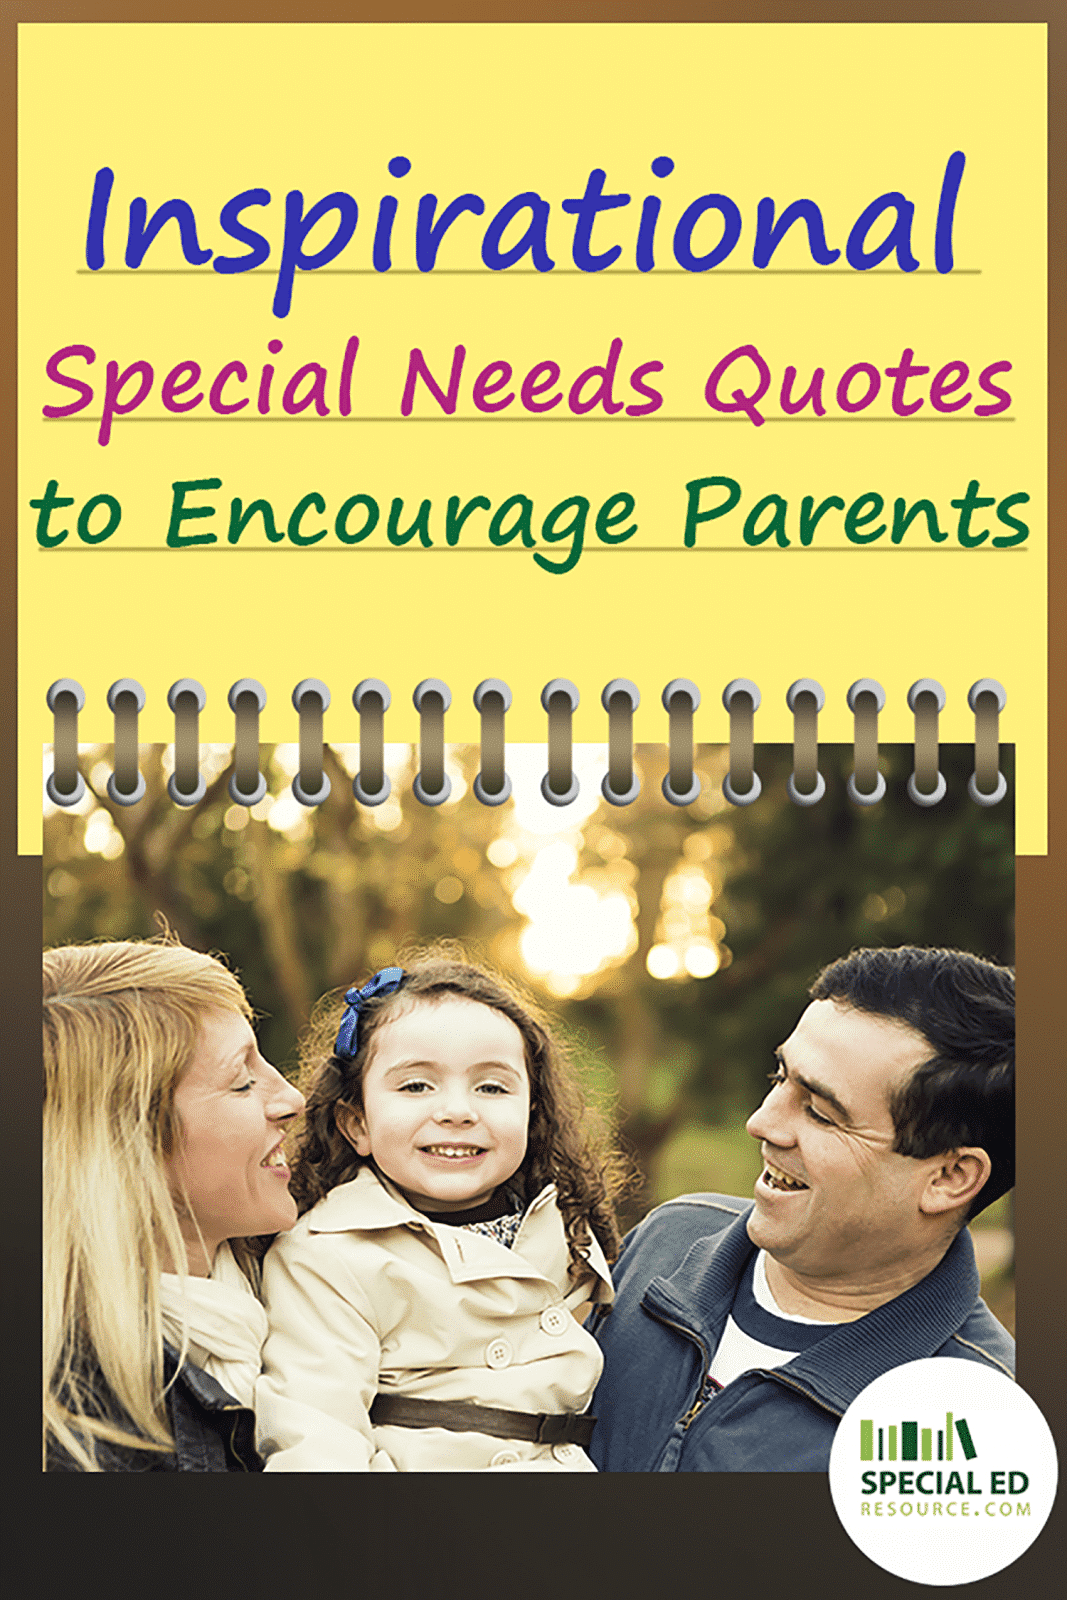 Inspirational Special Needs Quotes to Encourage Parents